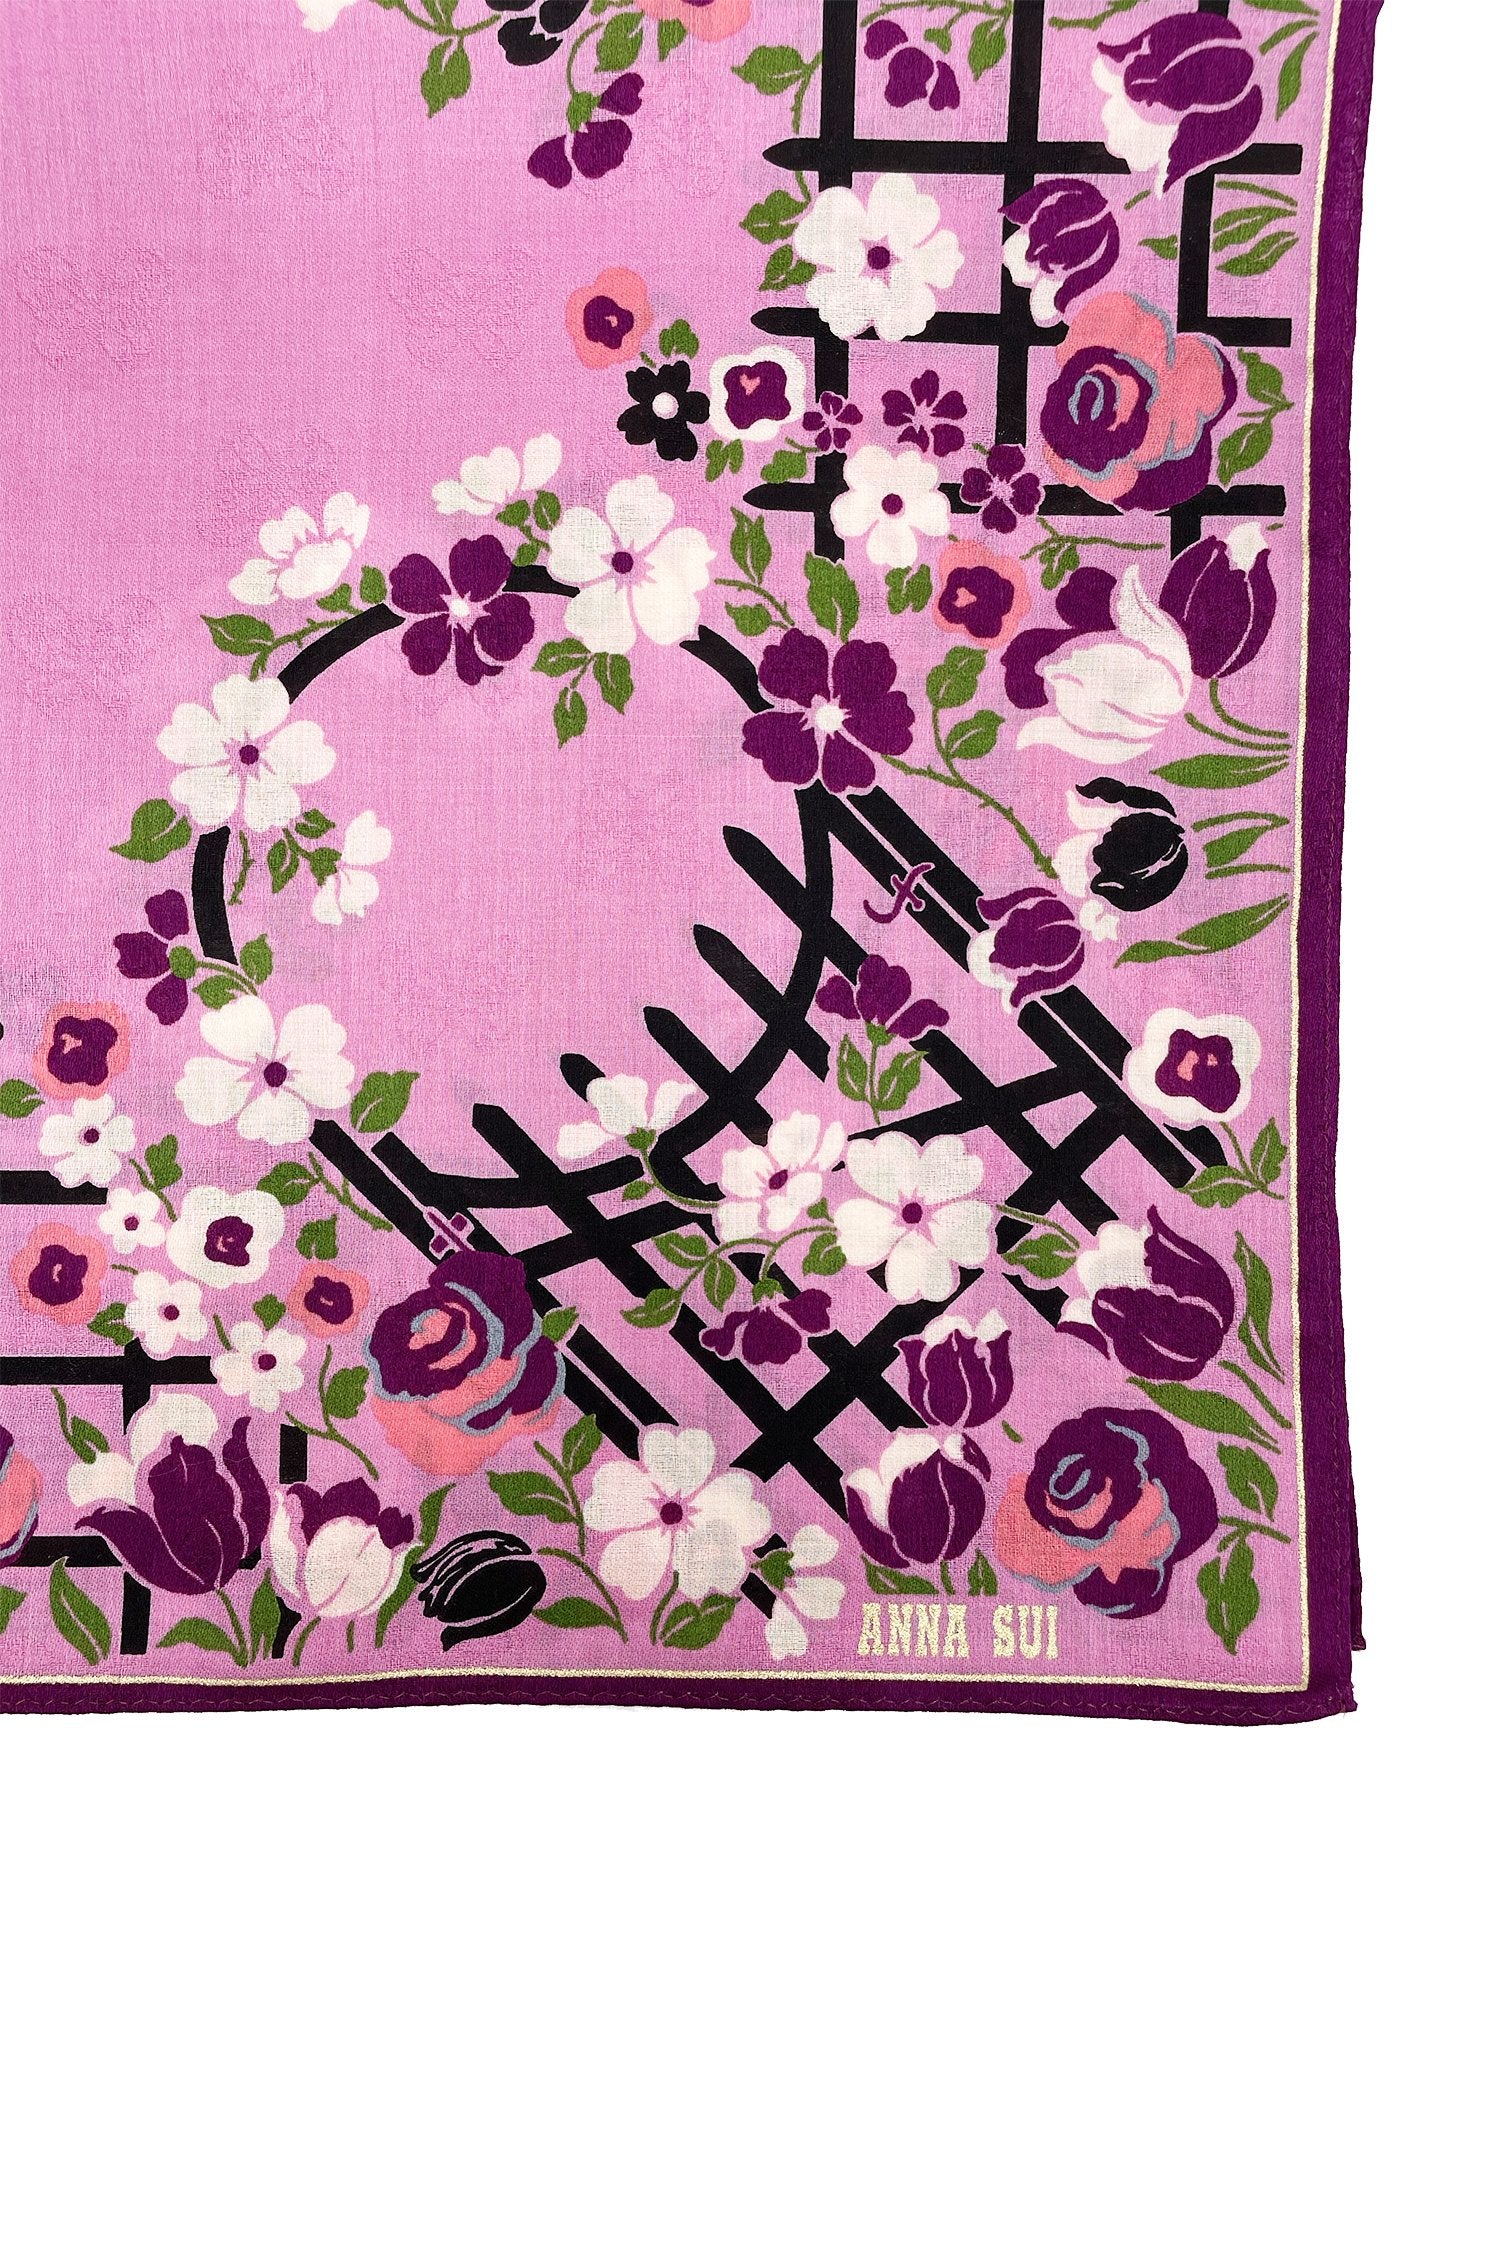 Handkerchief detail, purple, with white pansies on a black trellis, Anna’s label and burgundy border